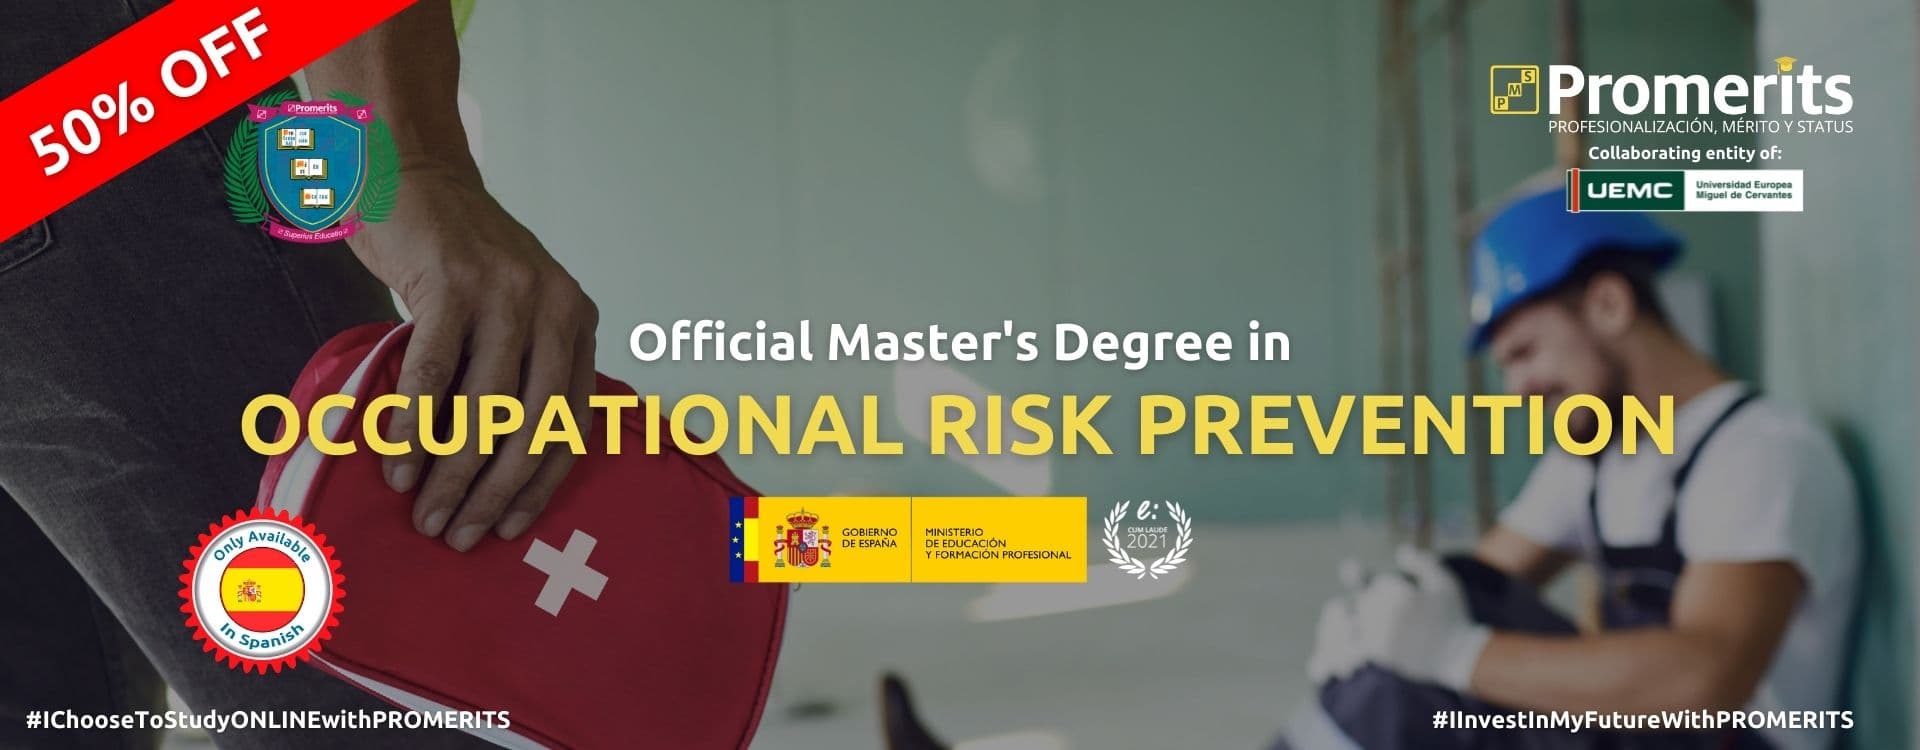 Official Master's Degree in Occupational Risk Prevention